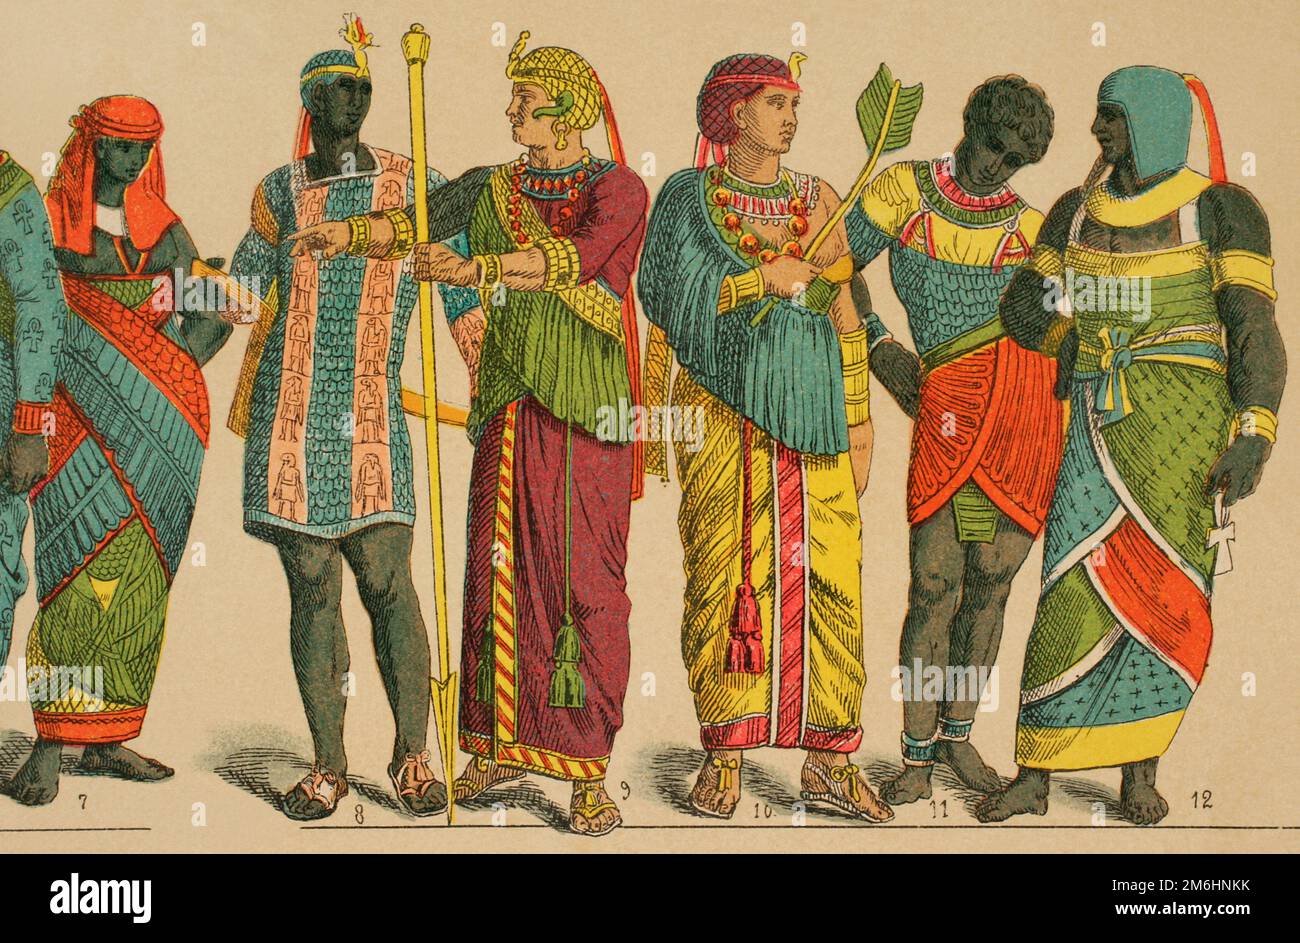 Ancient Egypt. From left to right; 7: priestess in ceremonial costume, 8: breastplate or chain-mail of scales, 9-10: costume adhered to the body with long narrow sleeves, 11-12: ornate apron for kings and priests. Chromolithography. 'Historia Universal' (Universal History), by Cesar Cantu. Volume I, 1881. Stock Photo